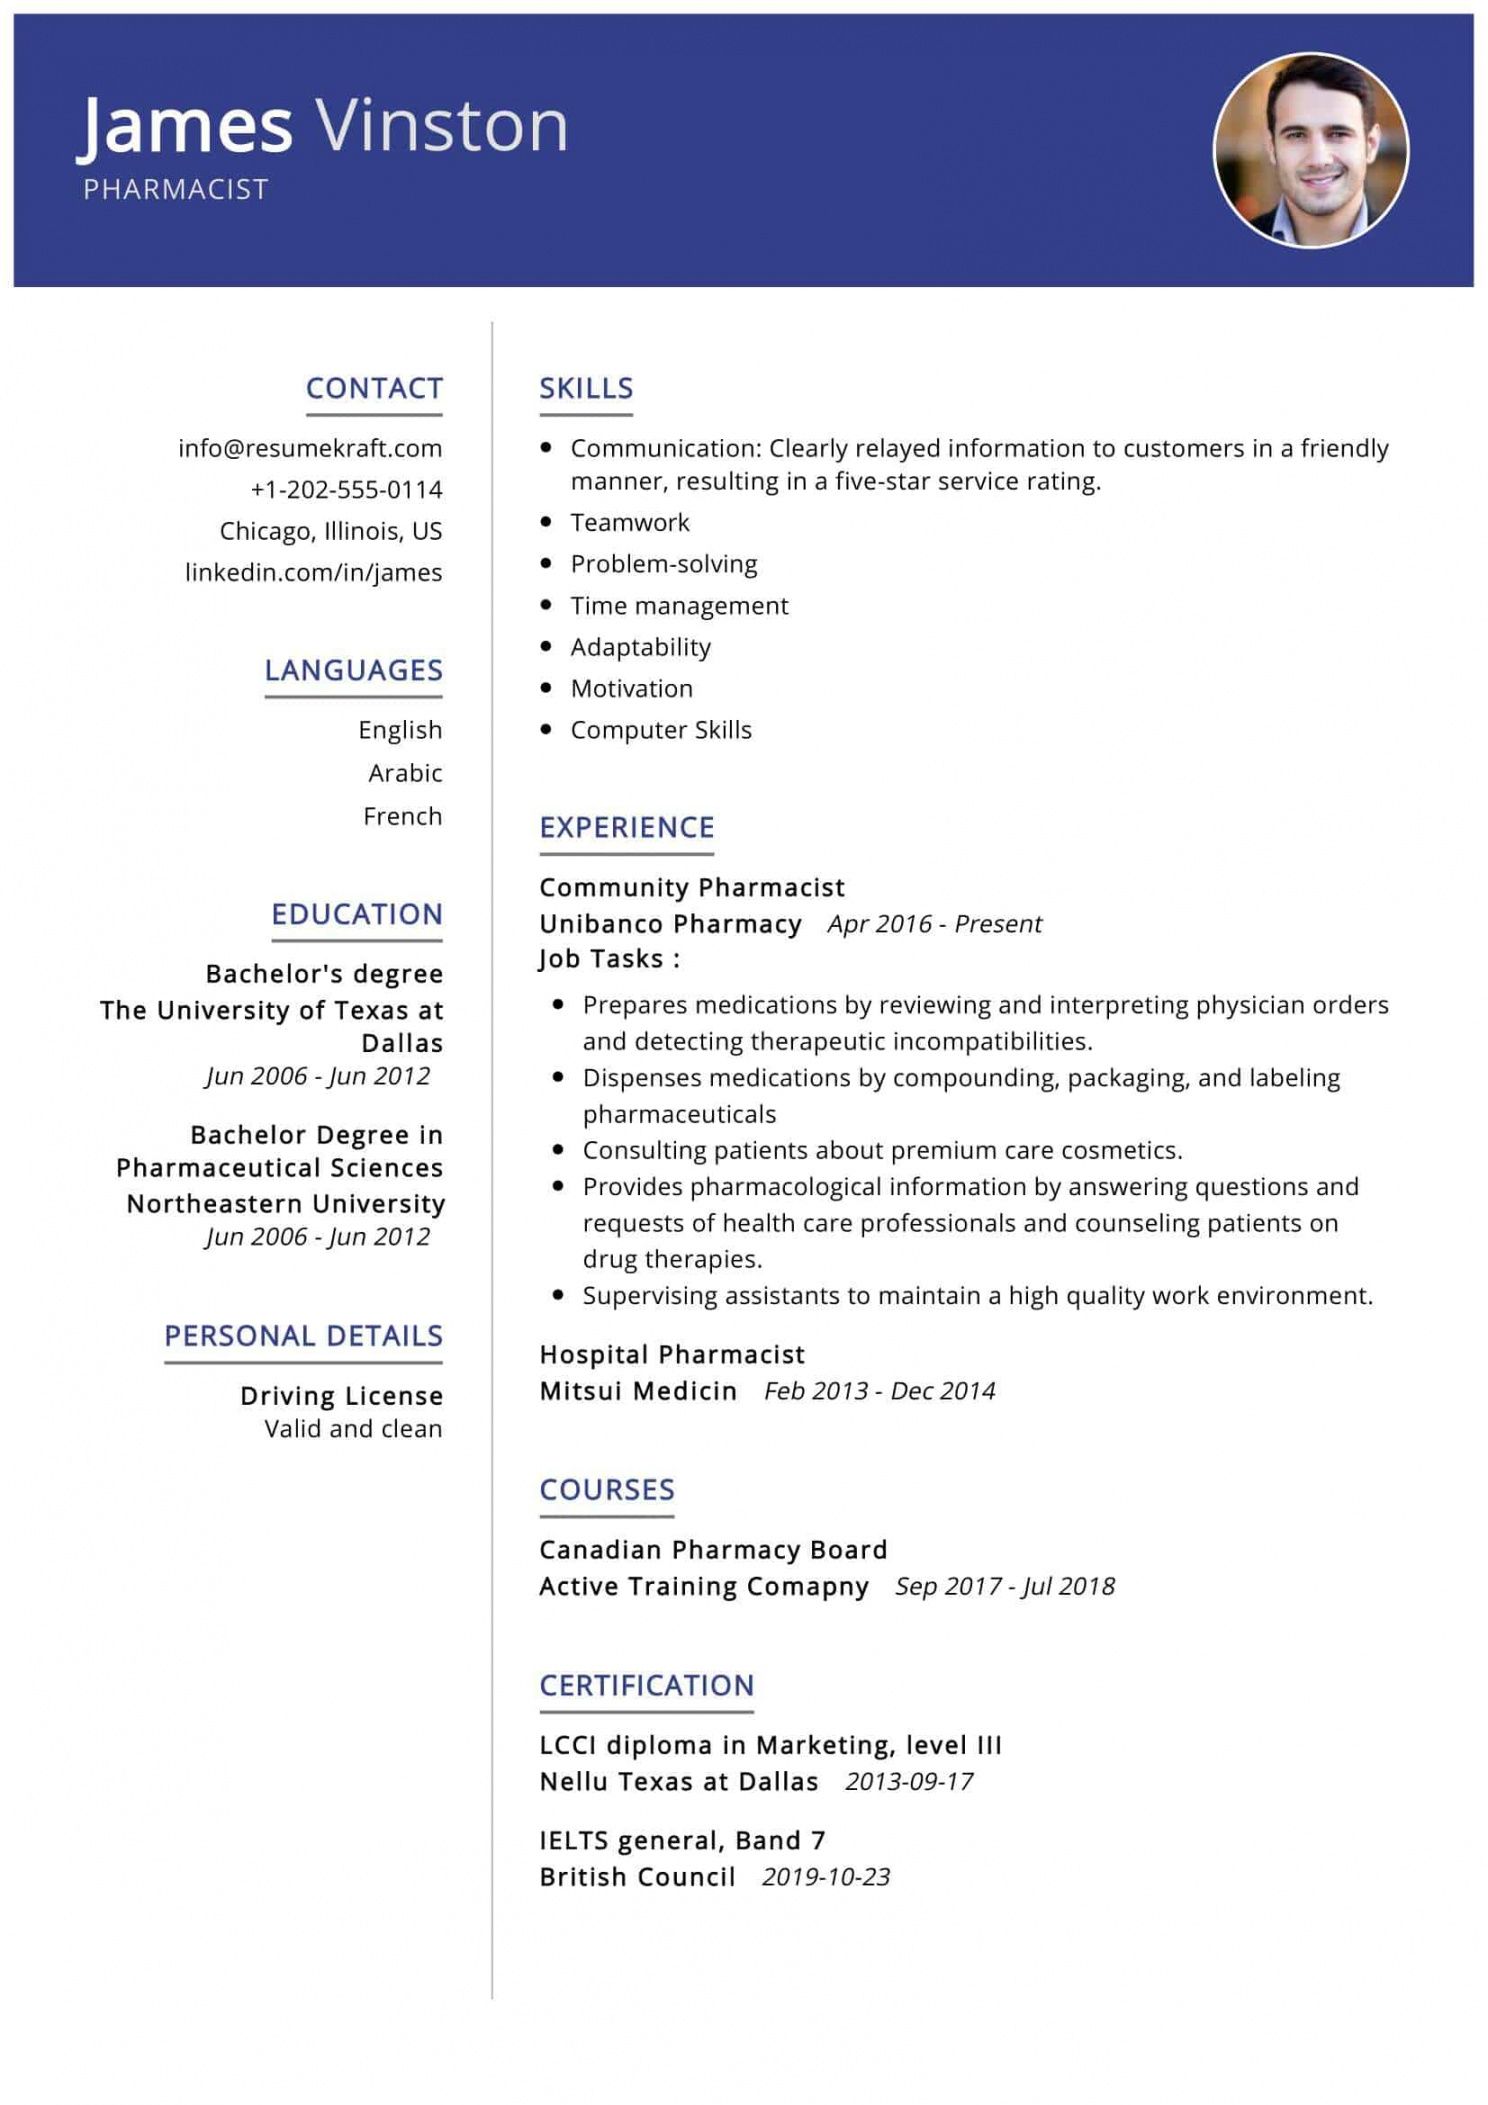 5 pharmacist resume examples template for august 2021 ᐅ the poetry standard job description template doc